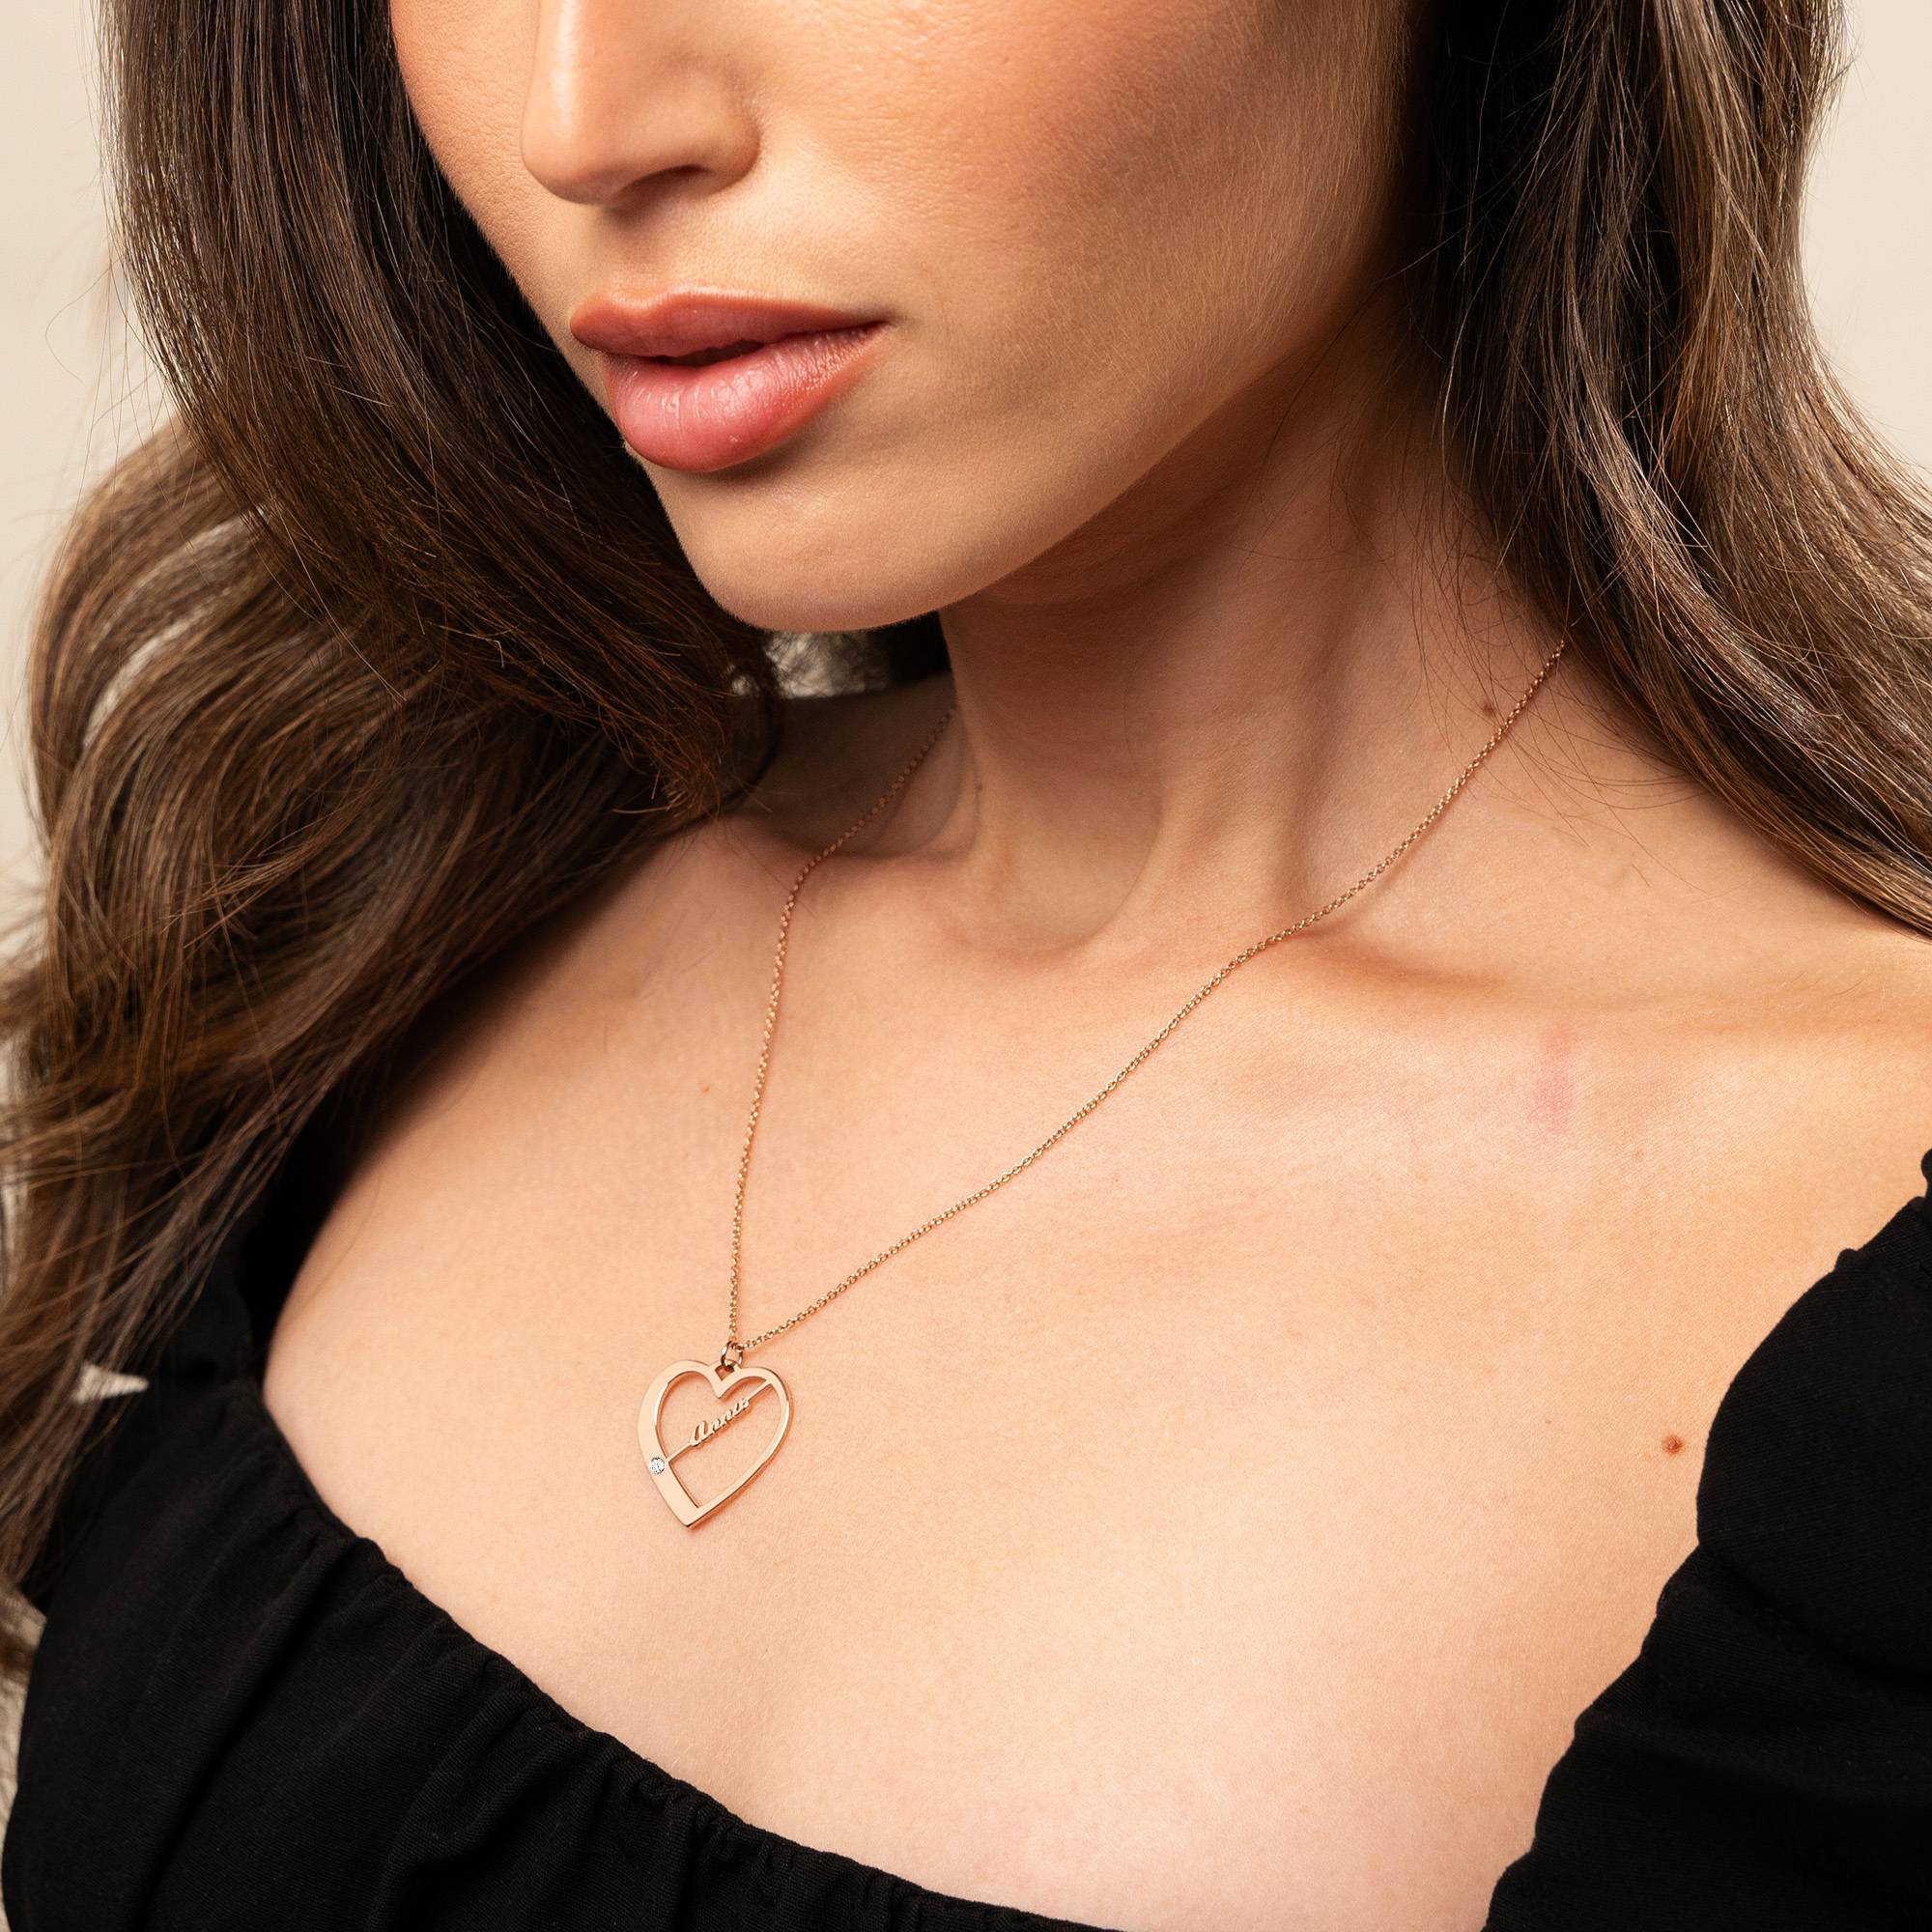 Ella Diamond Heart Necklace with Names in 18K Rose Gold Plating-7 product photo